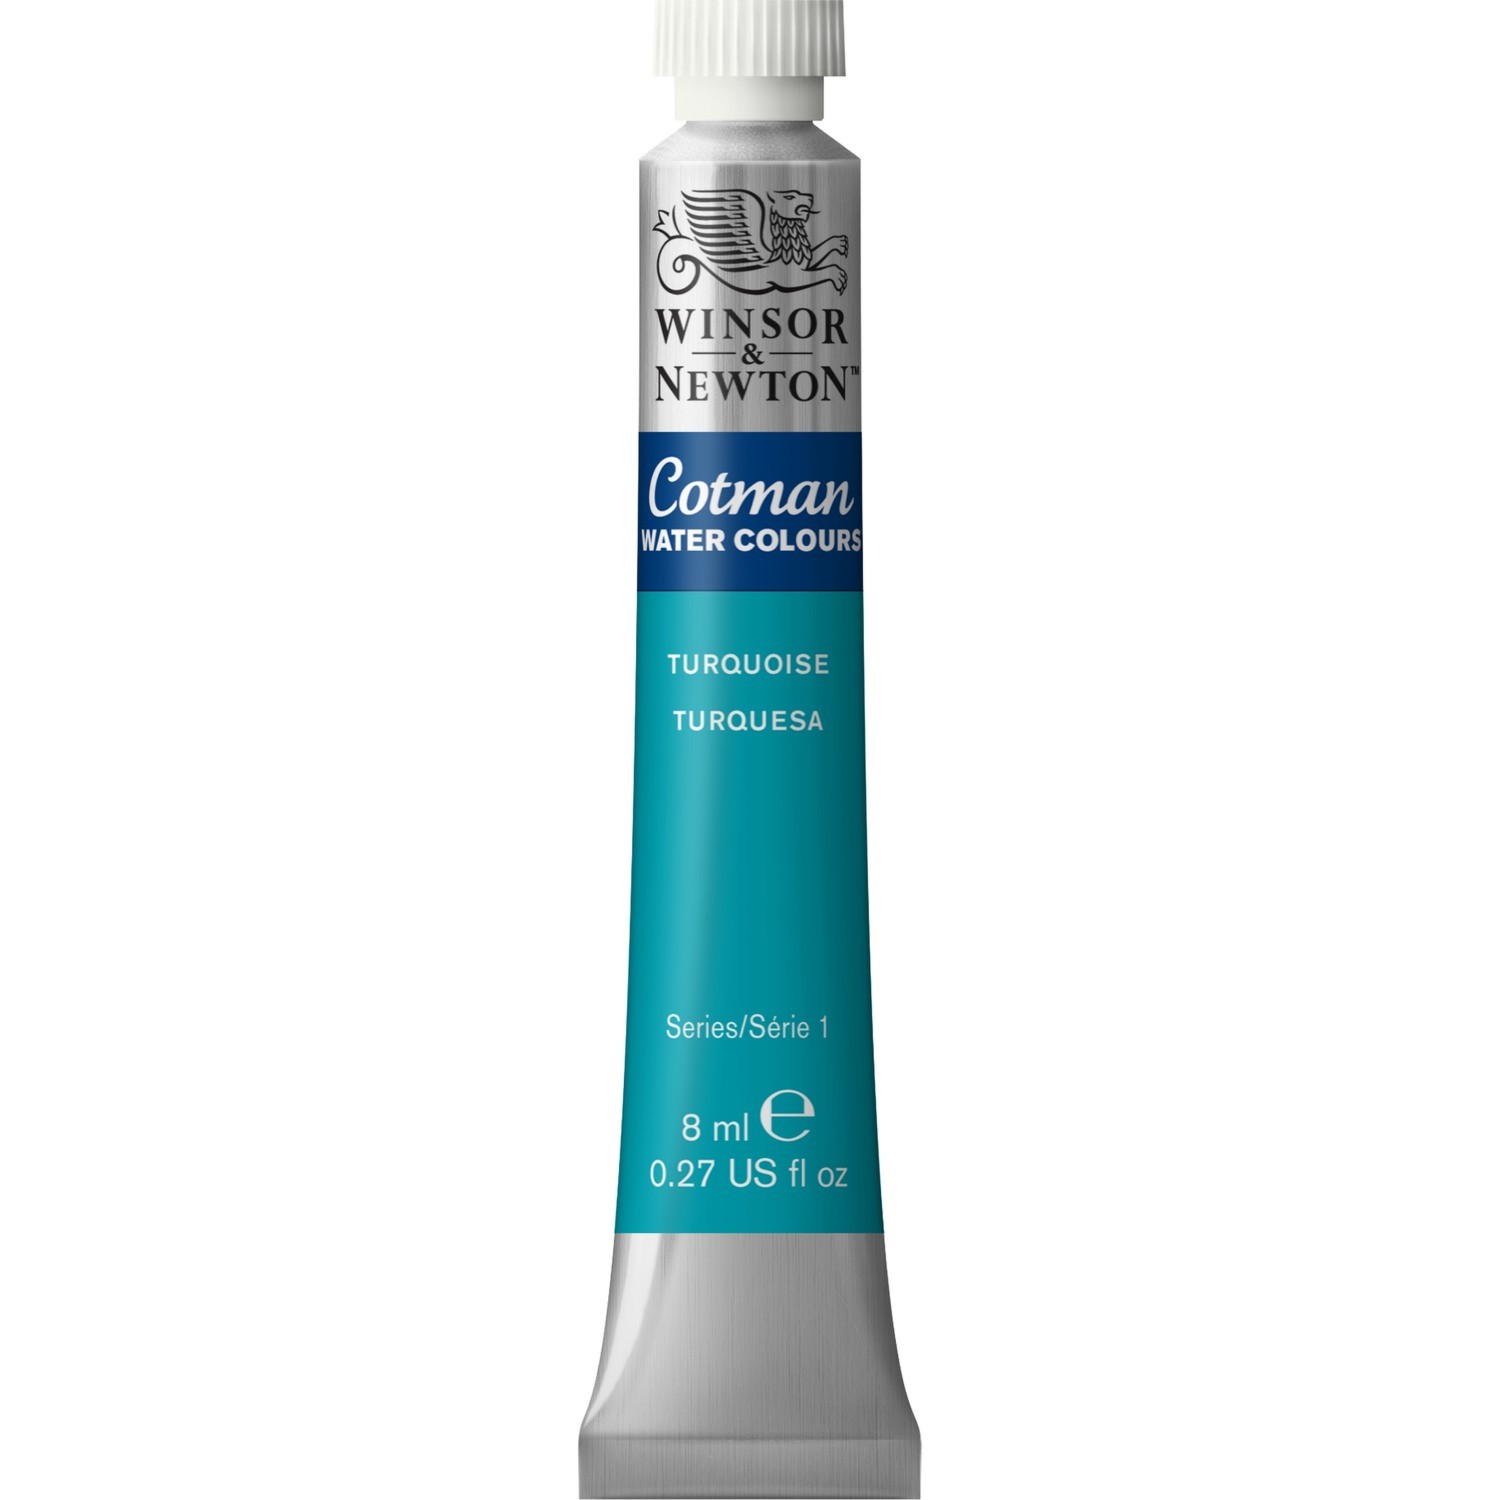 Winsor and Newton Cotman Watercolour Paint - Turquoise Image 1